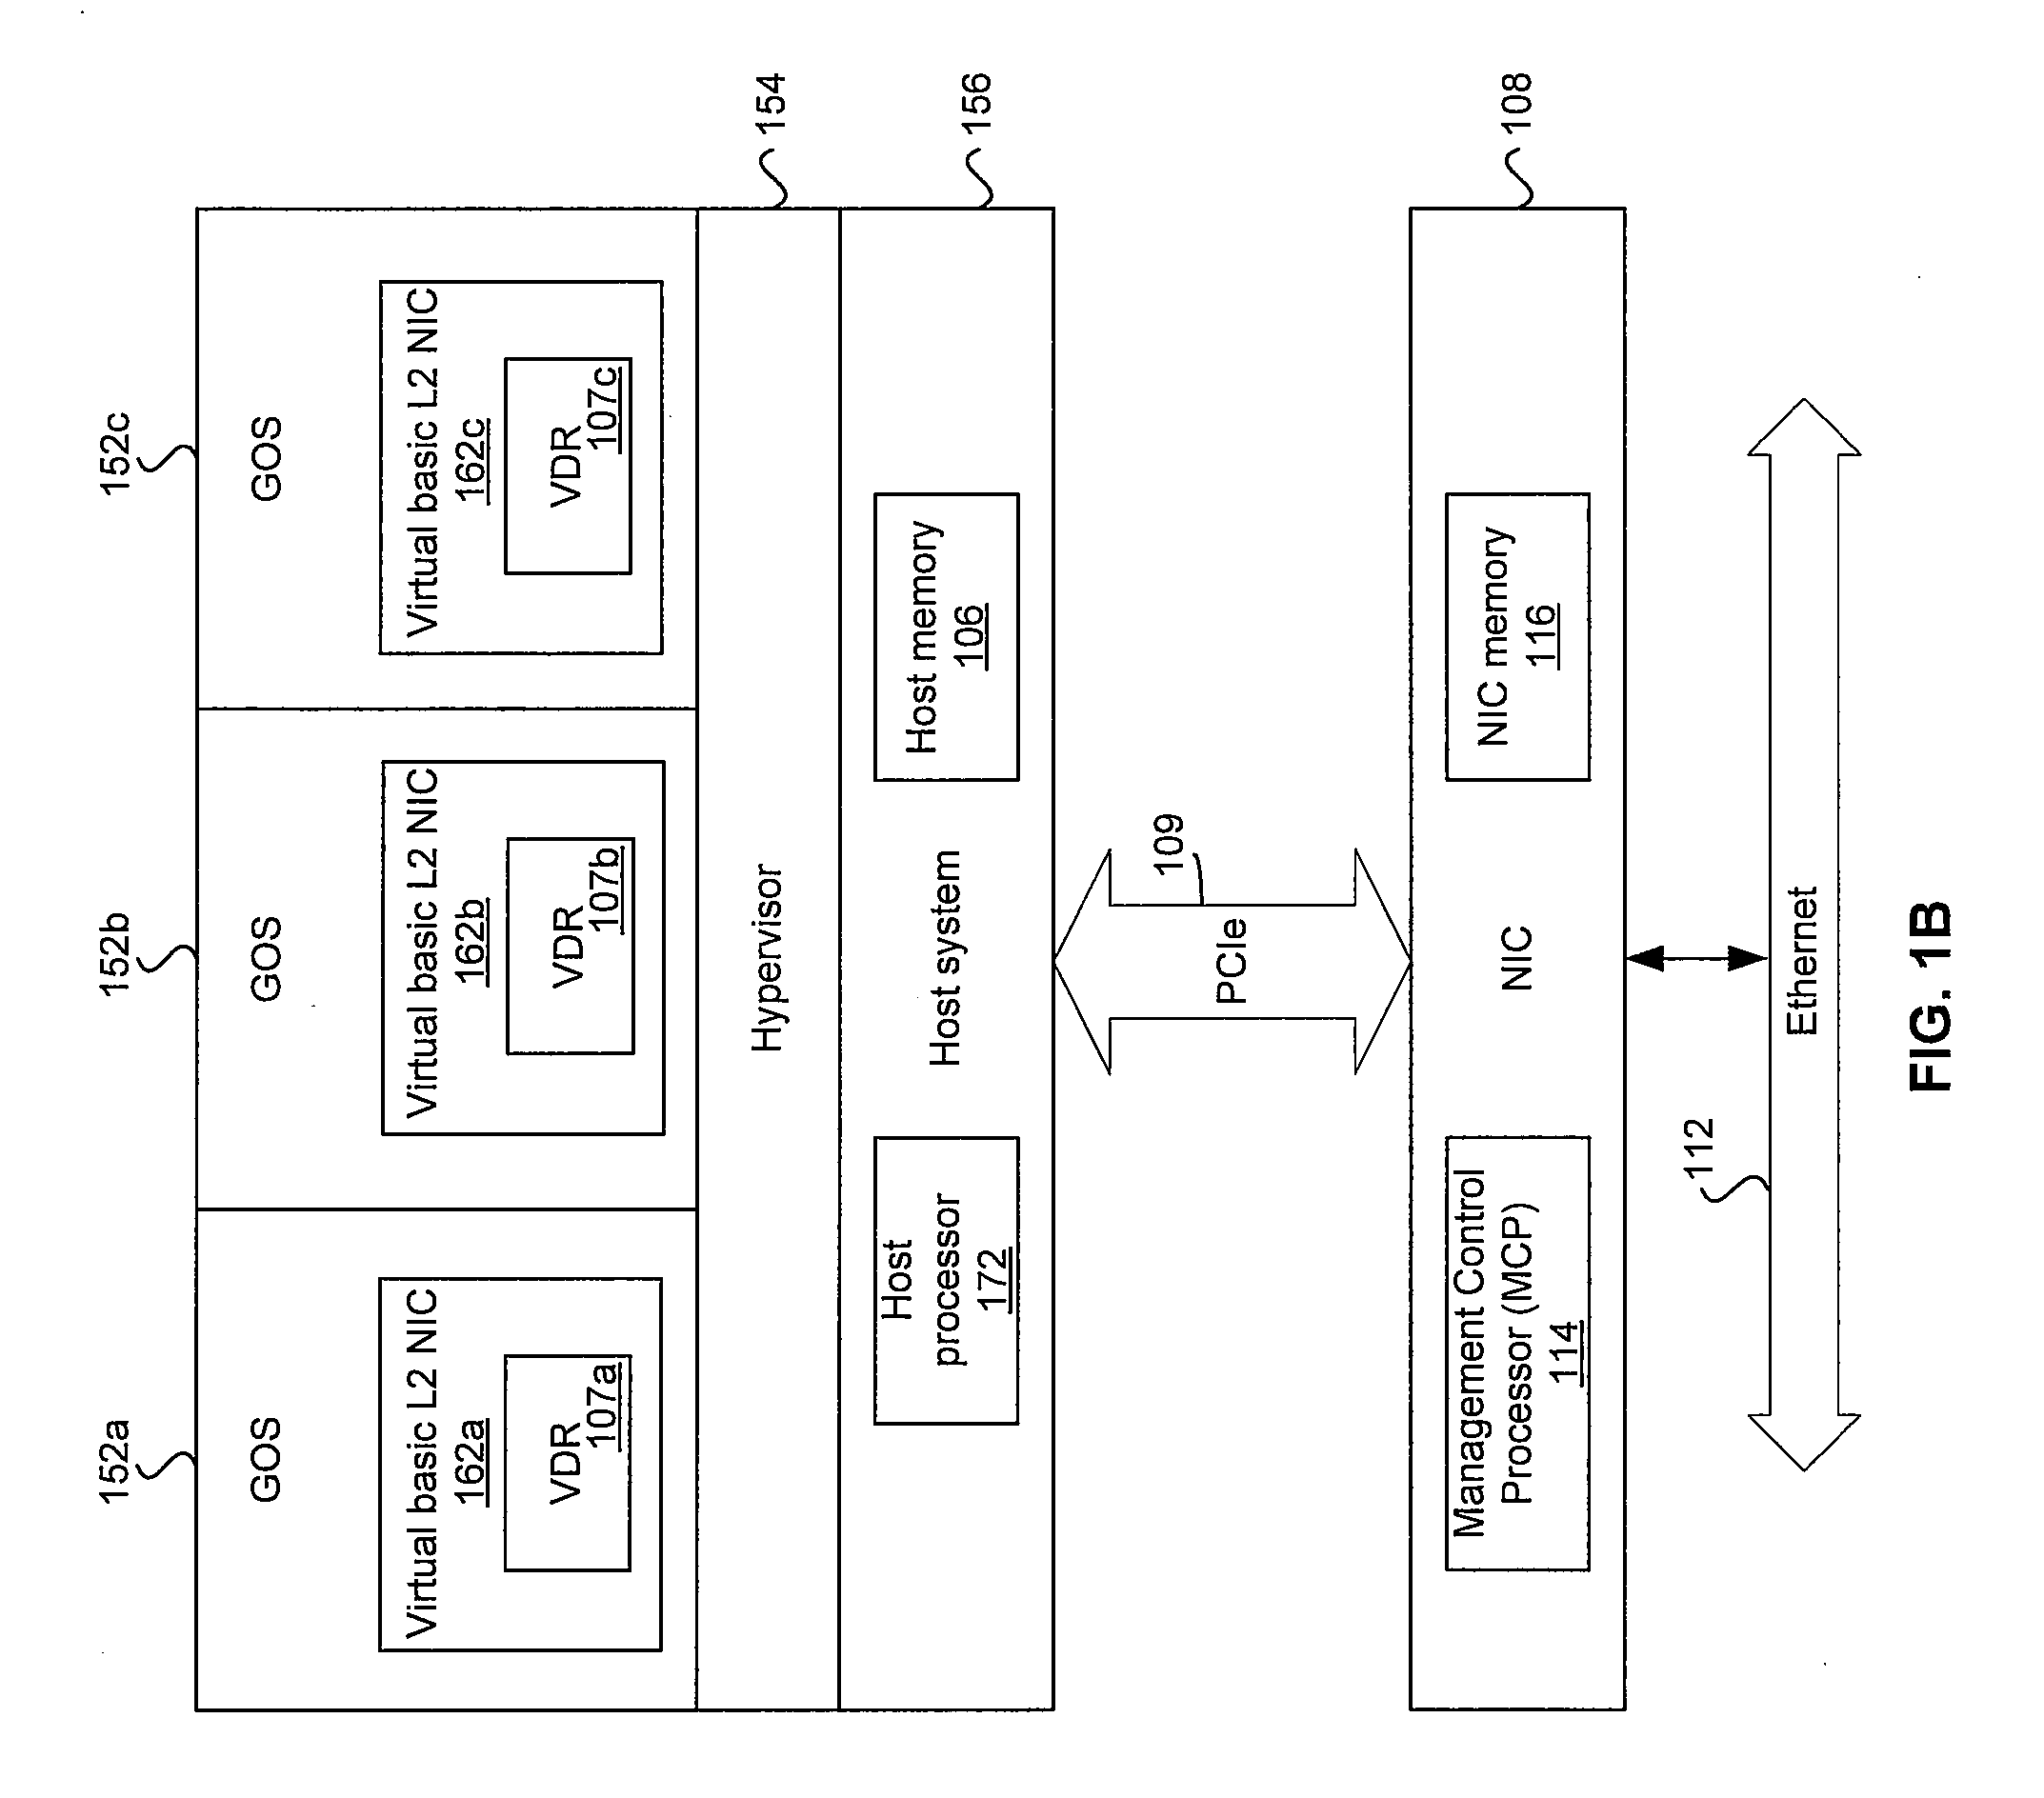 Method and system for configuring a plurality of network interfaces that share a physical interface